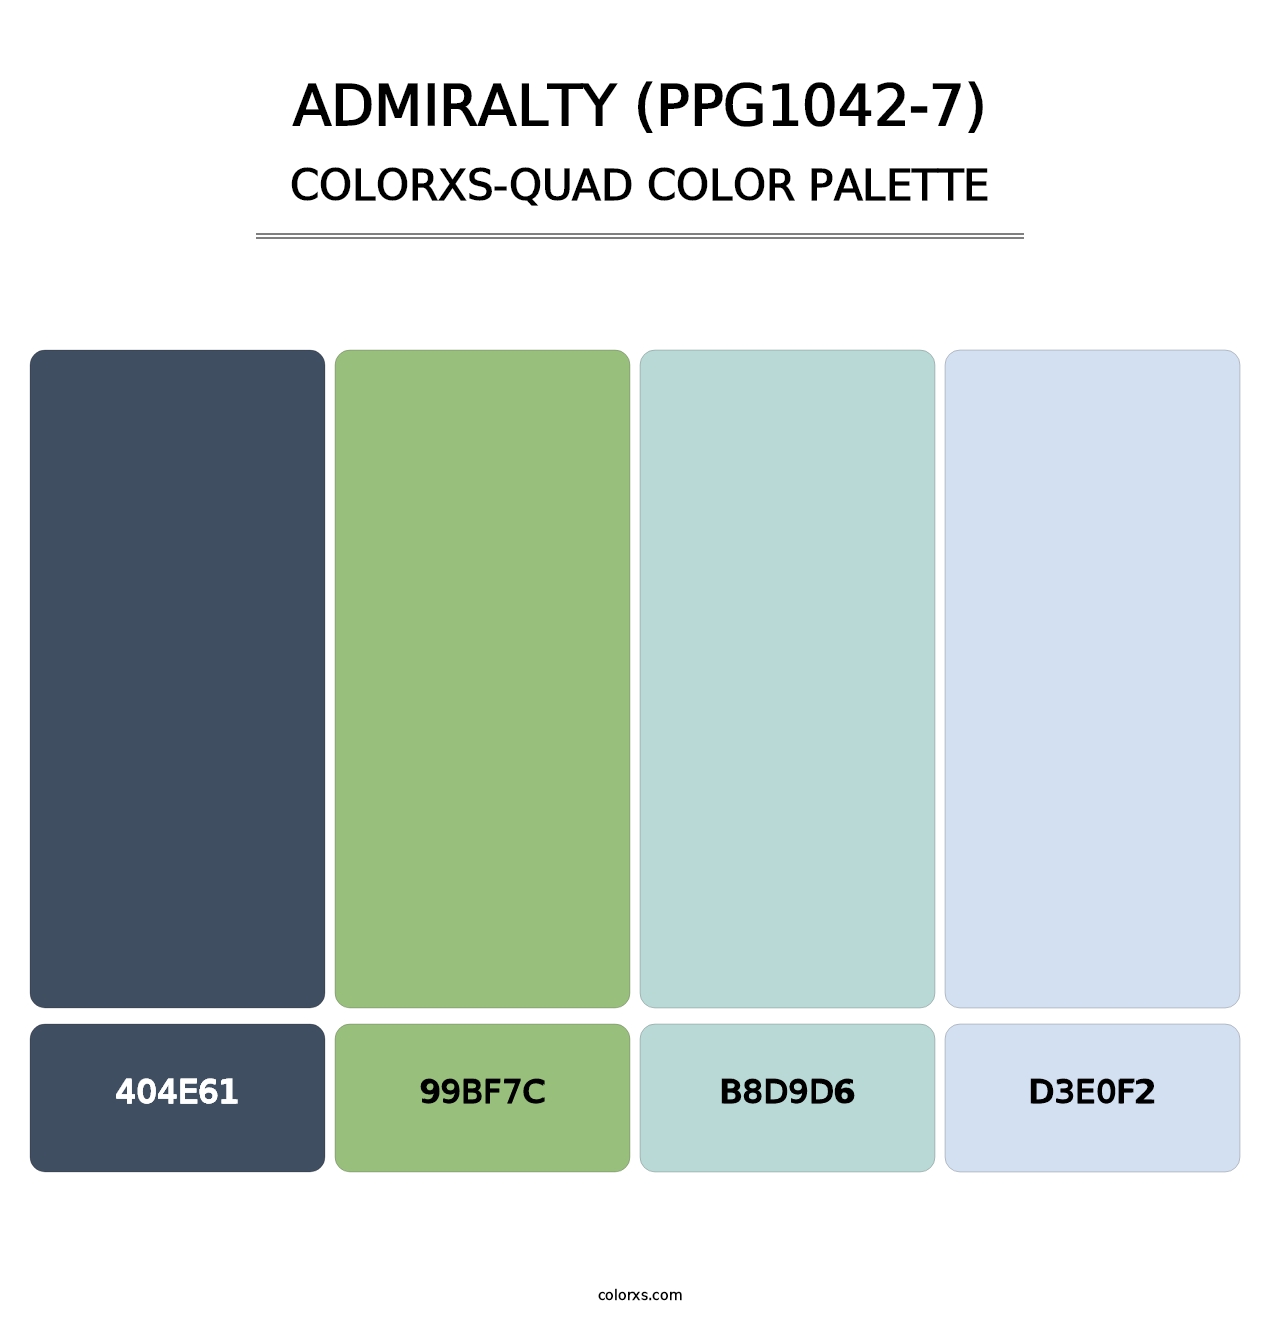 Admiralty (PPG1042-7) - Colorxs Quad Palette